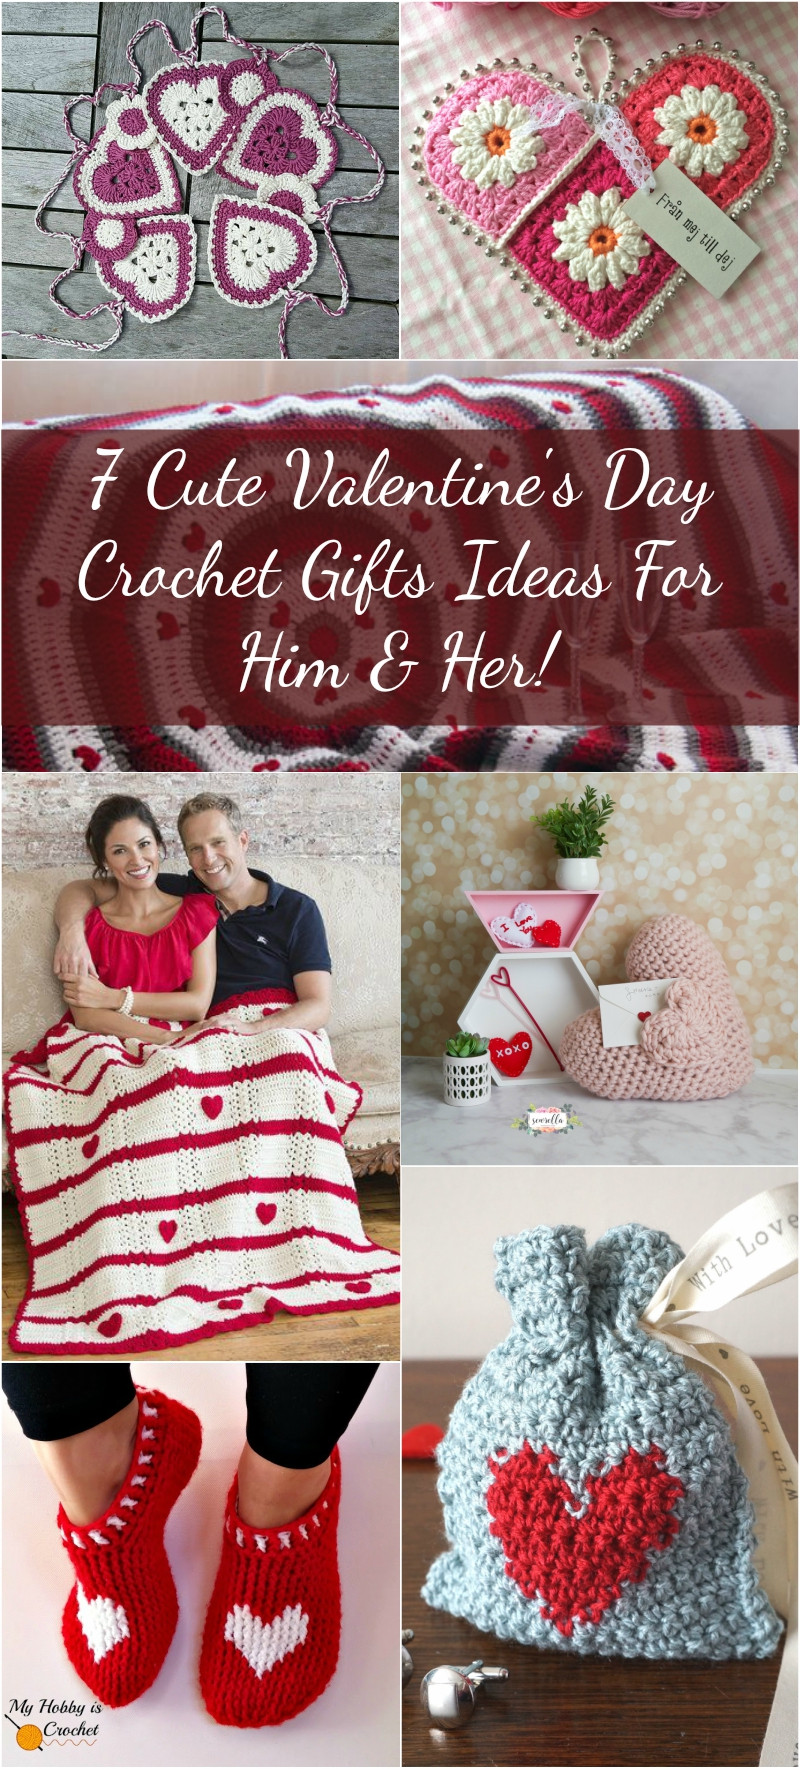 Cute Valentines Day Ideas For Her
 7 Cute Valentine s Day Crochet Gifts Ideas For Him & Her